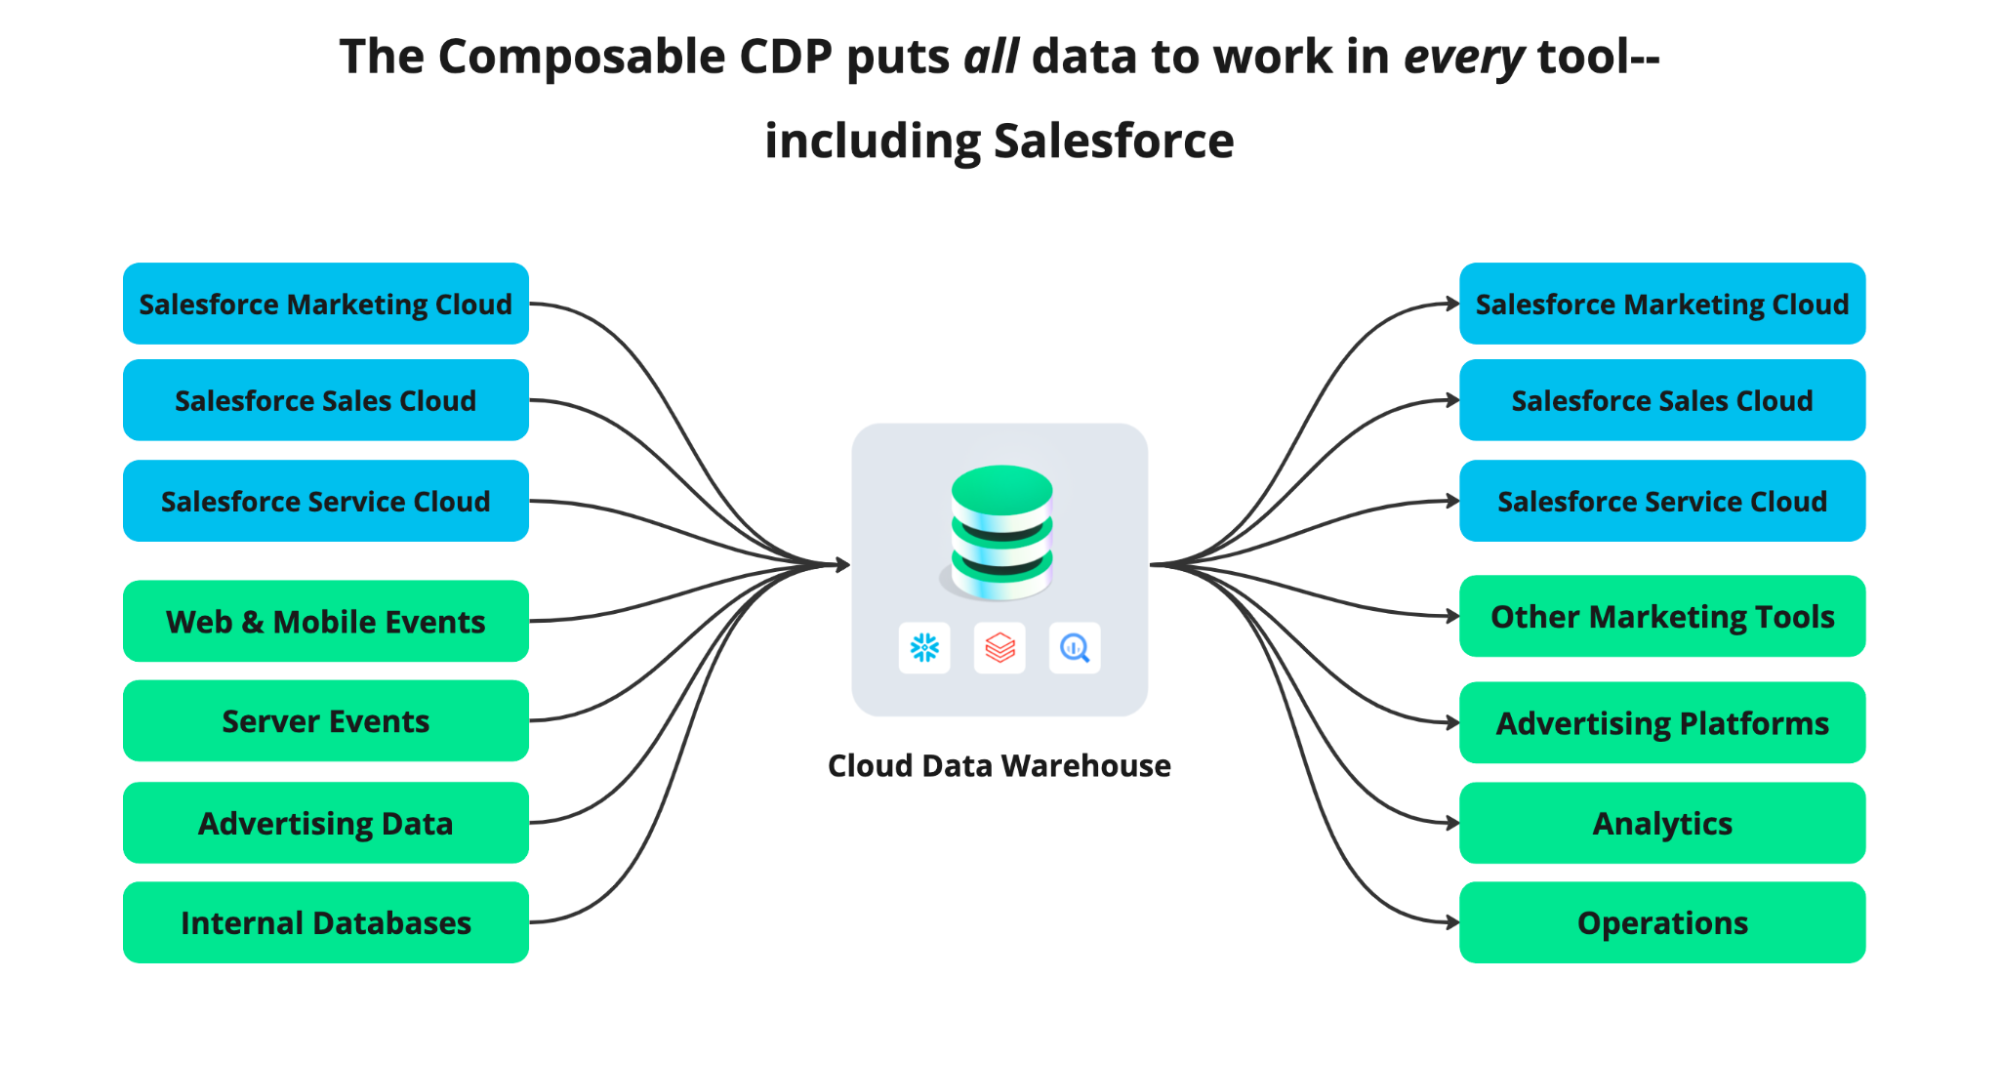 The Composable CDP supports Salesforce